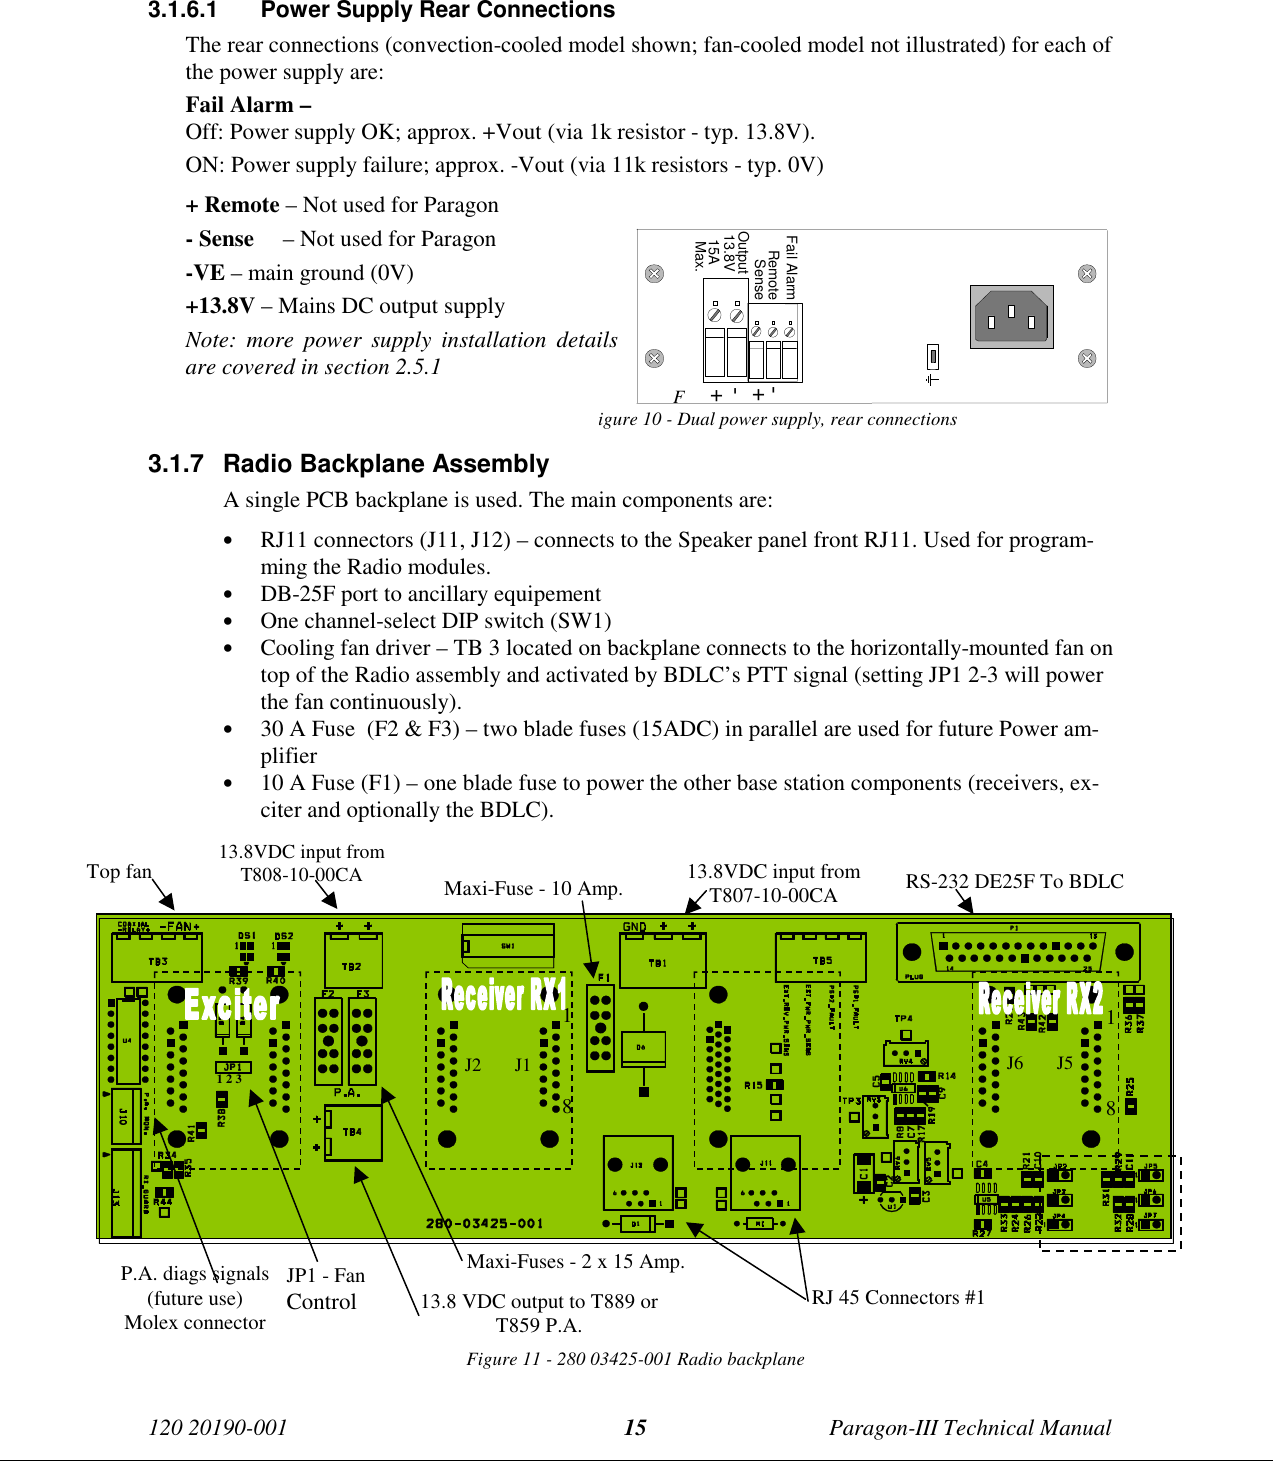 120 20190-001 Paragon-III Technical Manual153.1.6.1  Power Supply Rear ConnectionsThe rear connections (convection-cooled model shown; fan-cooled model not illustrated) for each ofthe power supply are:Fail Alarm –Off: Power supply OK; approx. +Vout (via 1k resistor - typ. 13.8V).ON: Power supply failure; approx. -Vout (via 11k resistors - typ. 0V)+ Remote – Not used for Paragon- Sense     – Not used for Paragon-VE – main ground (0V)+13.8V – Mains DC output supplyNote: more power supply installation detailsare covered in section 2.5.1Figure 10 - Dual power supply, rear connections3.1.7  Radio Backplane AssemblyA single PCB backplane is used. The main components are:• RJ11 connectors (J11, J12) – connects to the Speaker panel front RJ11. Used for program-ming the Radio modules.• DB-25F port to ancillary equipement• One channel-select DIP switch (SW1)• Cooling fan driver – TB 3 located on backplane connects to the horizontally-mounted fan ontop of the Radio assembly and activated by BDLC’s PTT signal (setting JP1 2-3 will powerthe fan continuously).• 30 A Fuse  (F2 &amp; F3) – two blade fuses (15ADC) in parallel are used for future Power am-plifier• 10 A Fuse (F1) – one blade fuse to power the other base station components (receivers, ex-citer and optionally the BDLC).Figure 11 - 280 03425-001 Radio backplane15A+-OutputSense+-RemoteFail Alarm13.8VMax.Top fan 13.8VDC input fromT808-10-00CA 13.8VDC input fromT807-10-00CA RS-232 DE25F To BDLCMaxi-Fuse - 10 Amp.13.8 VDC output to T889 orT859 P.A.Maxi-Fuses - 2 x 15 Amp.RJ 45 Connectors #11 2 3JP1 - FanControl1818J2       J1 J6       J5P.A. diags signals(future use)Molex connector